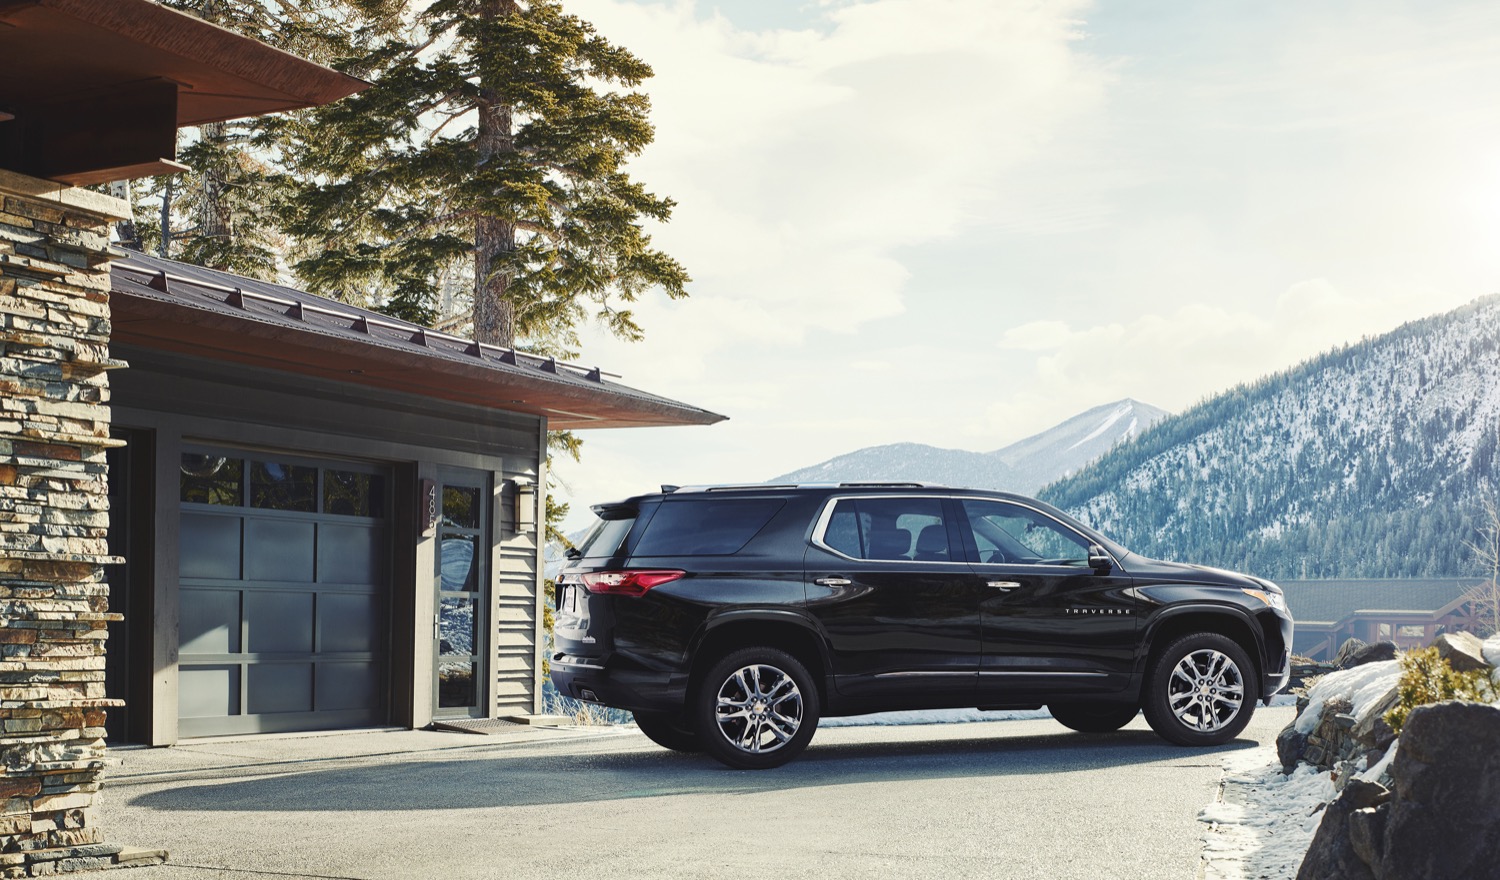 2018 Chevy Traverse Specifications Released Gm Authority